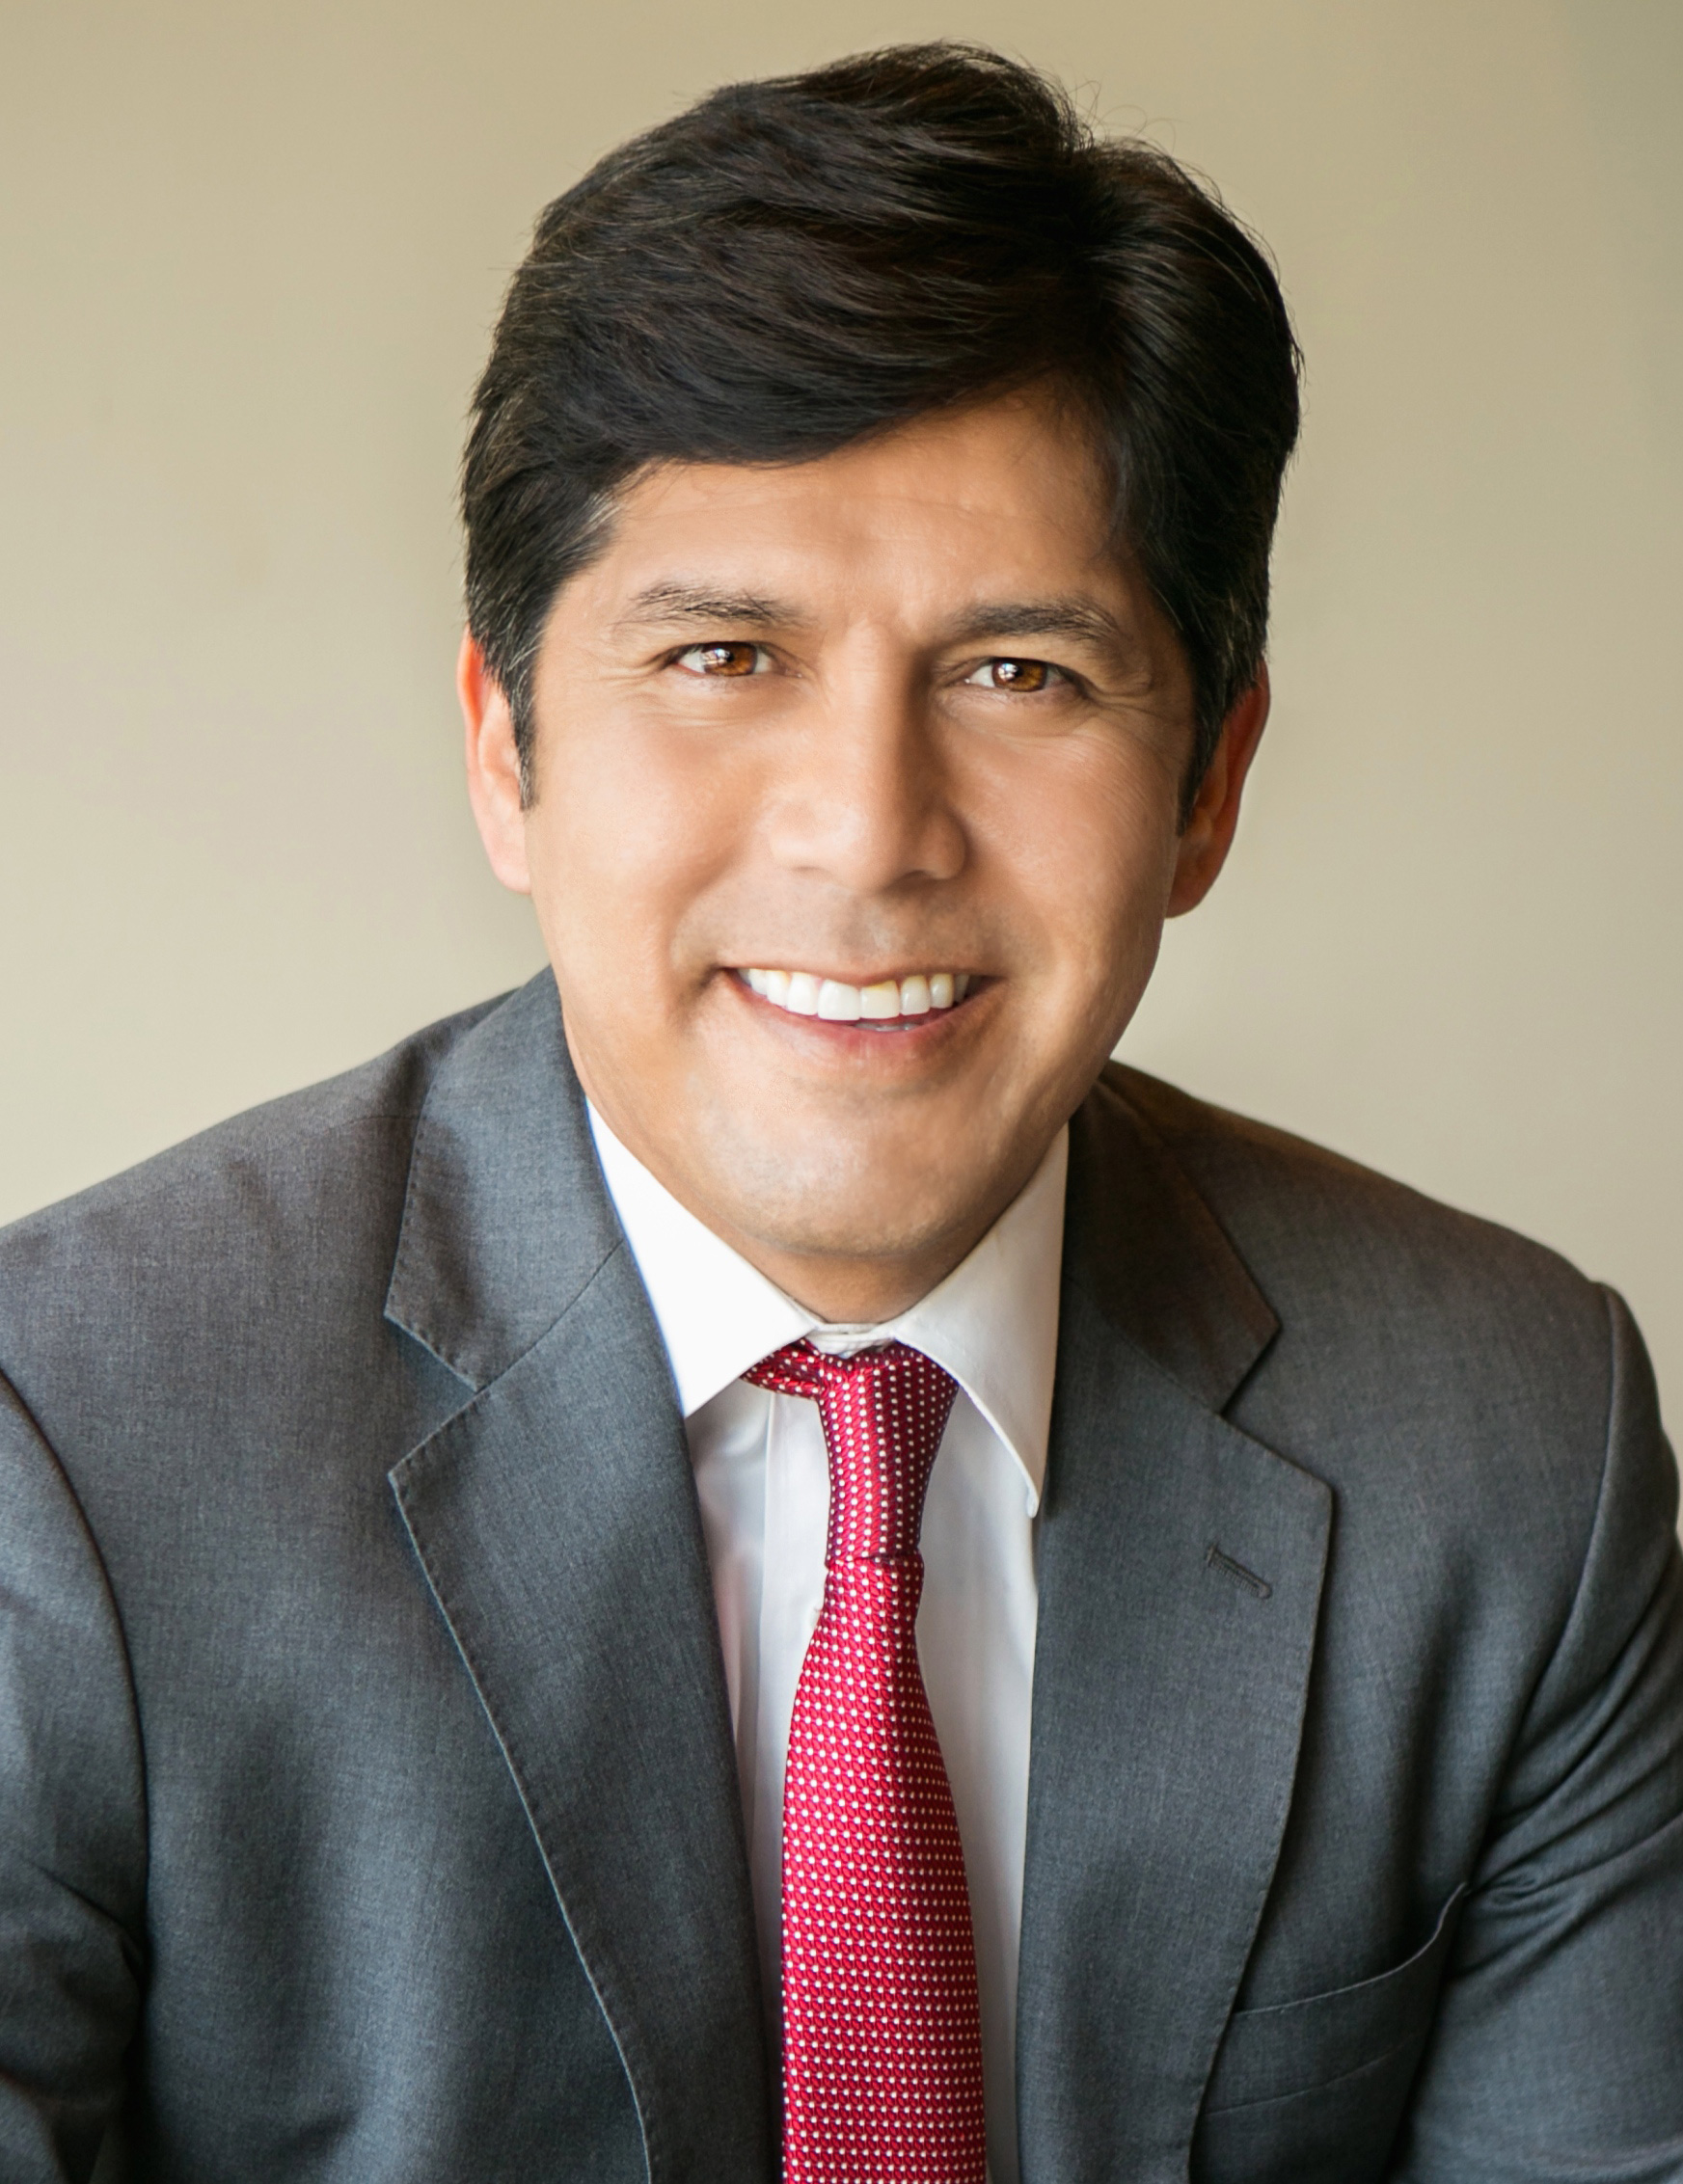 Immigrant Rights Activist Kevin De Leon Snubs Black Migrant Mayoral Candidate Forum, While Karen Bass and Gina Viola Engage